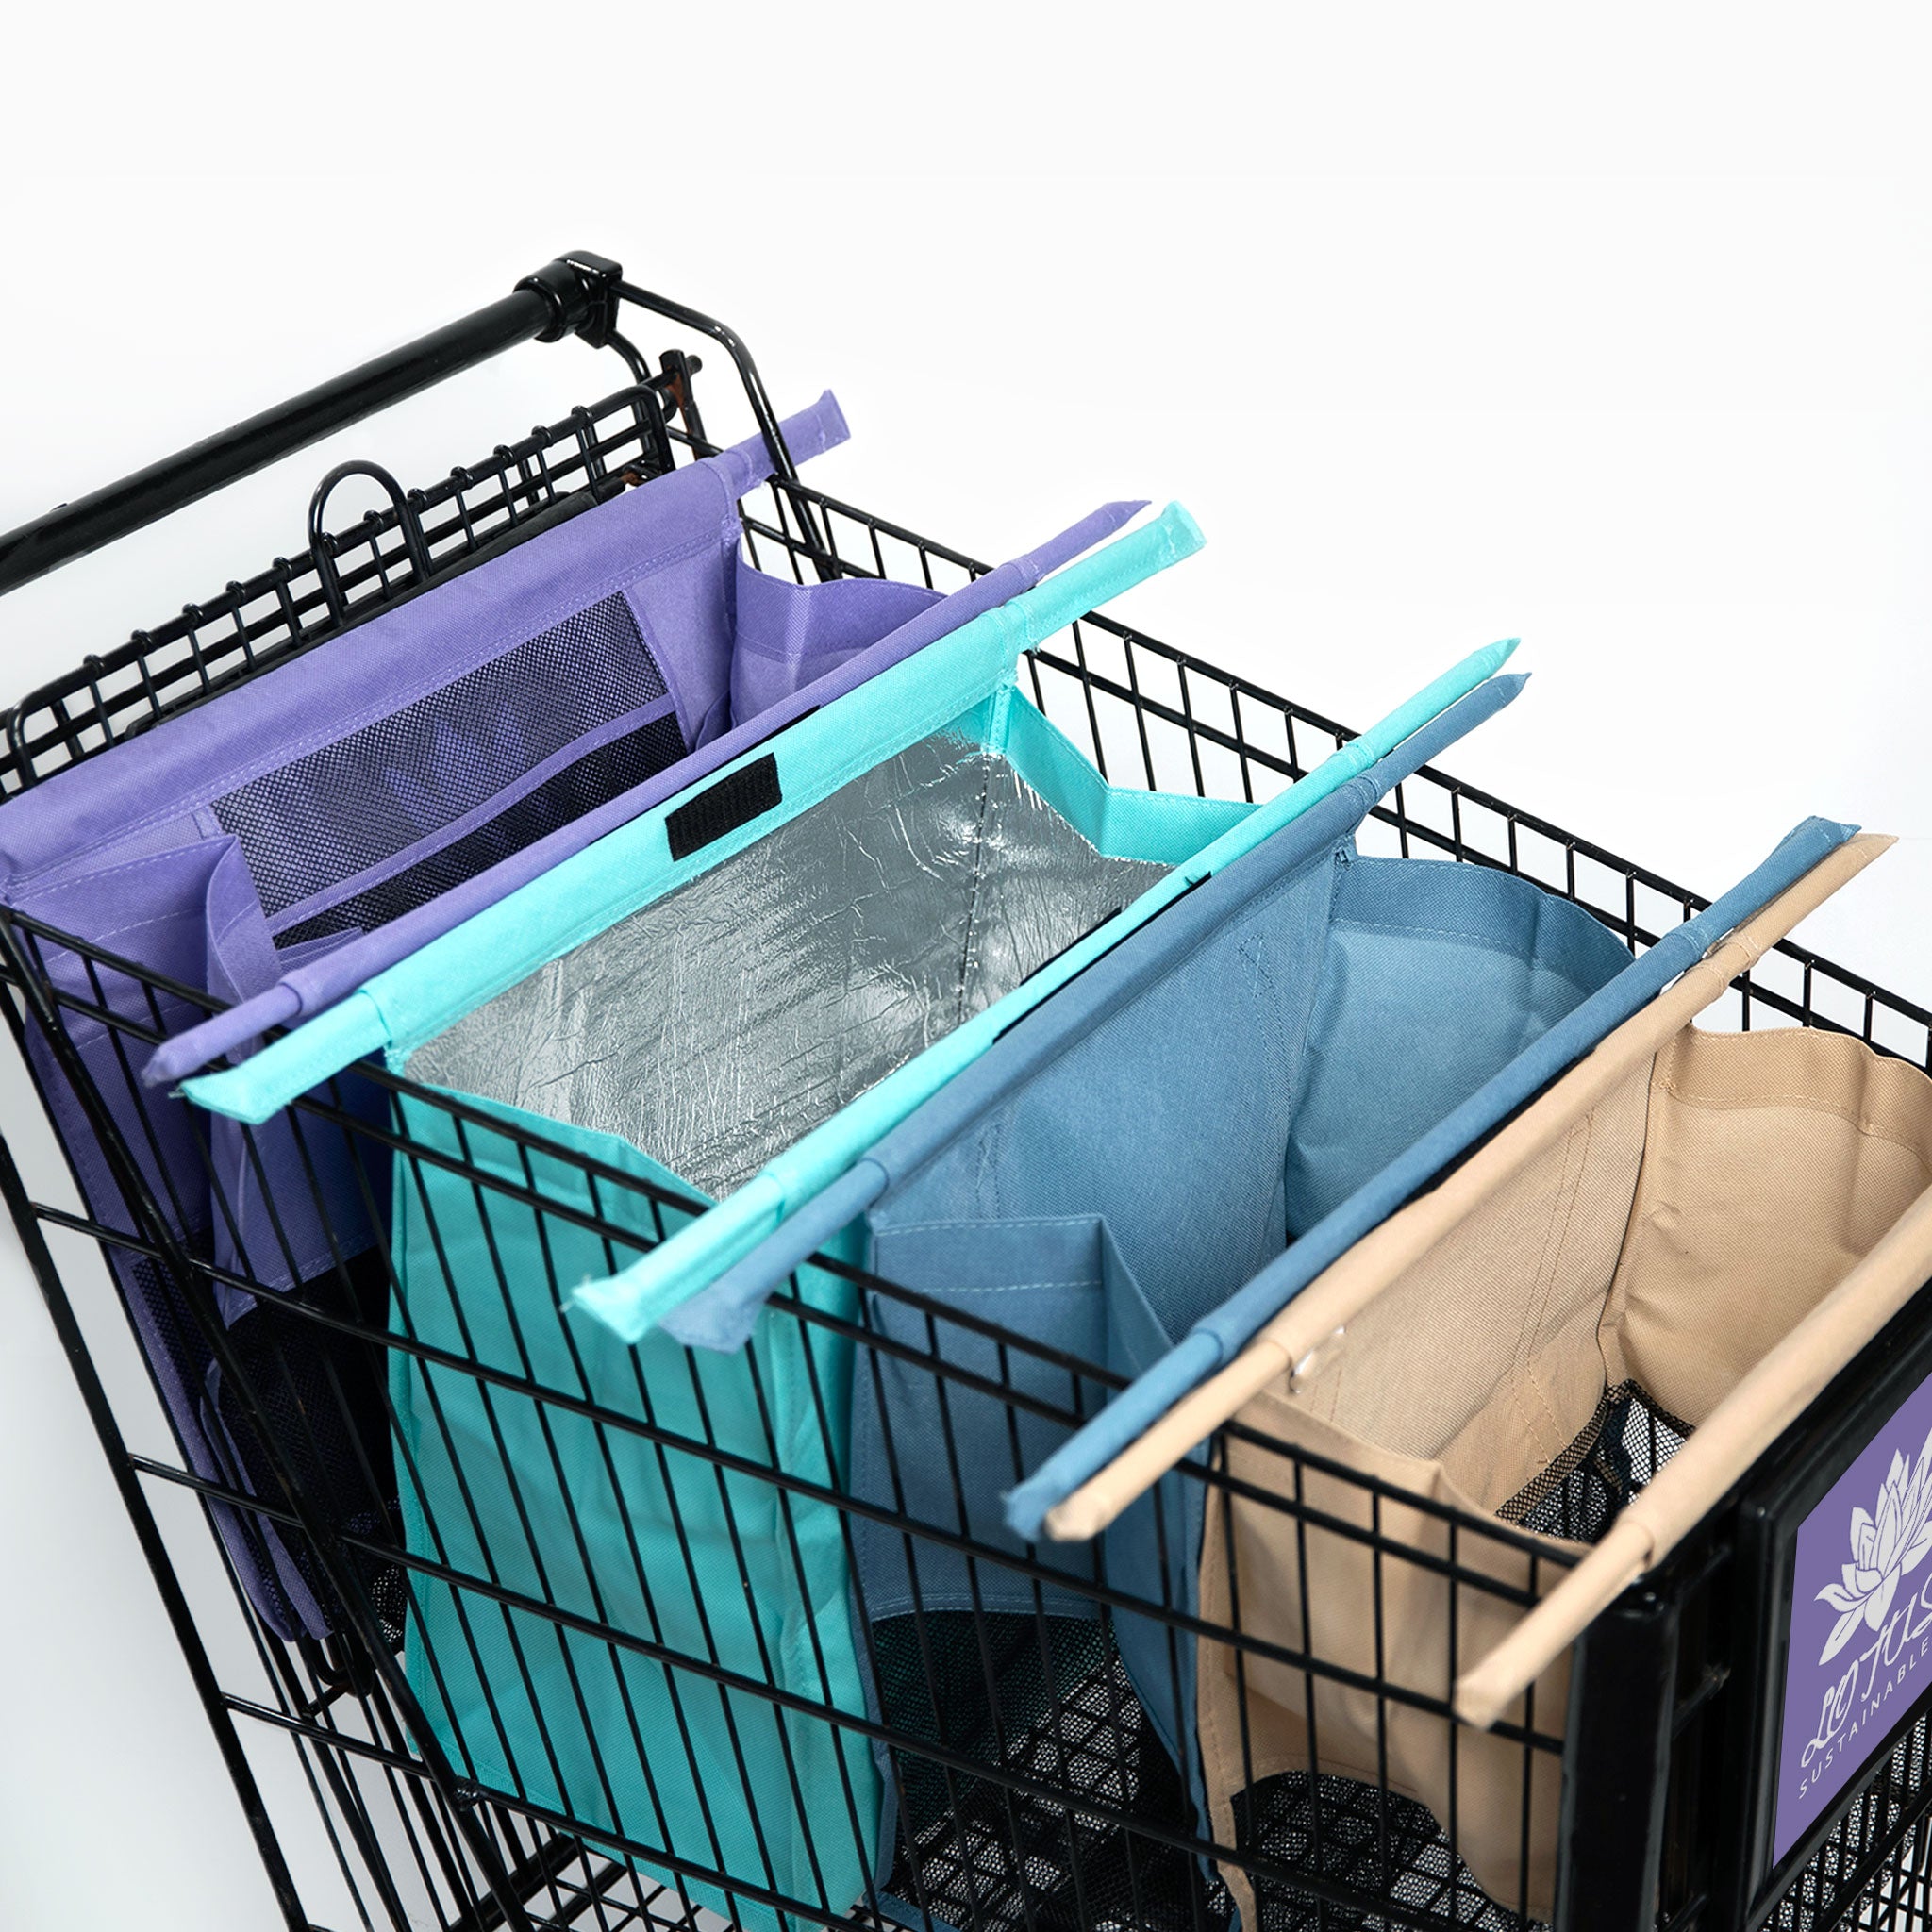 The Complete and Organized Reusable Trolley Bags 🛍 - LOTUS TROLLEY BAG